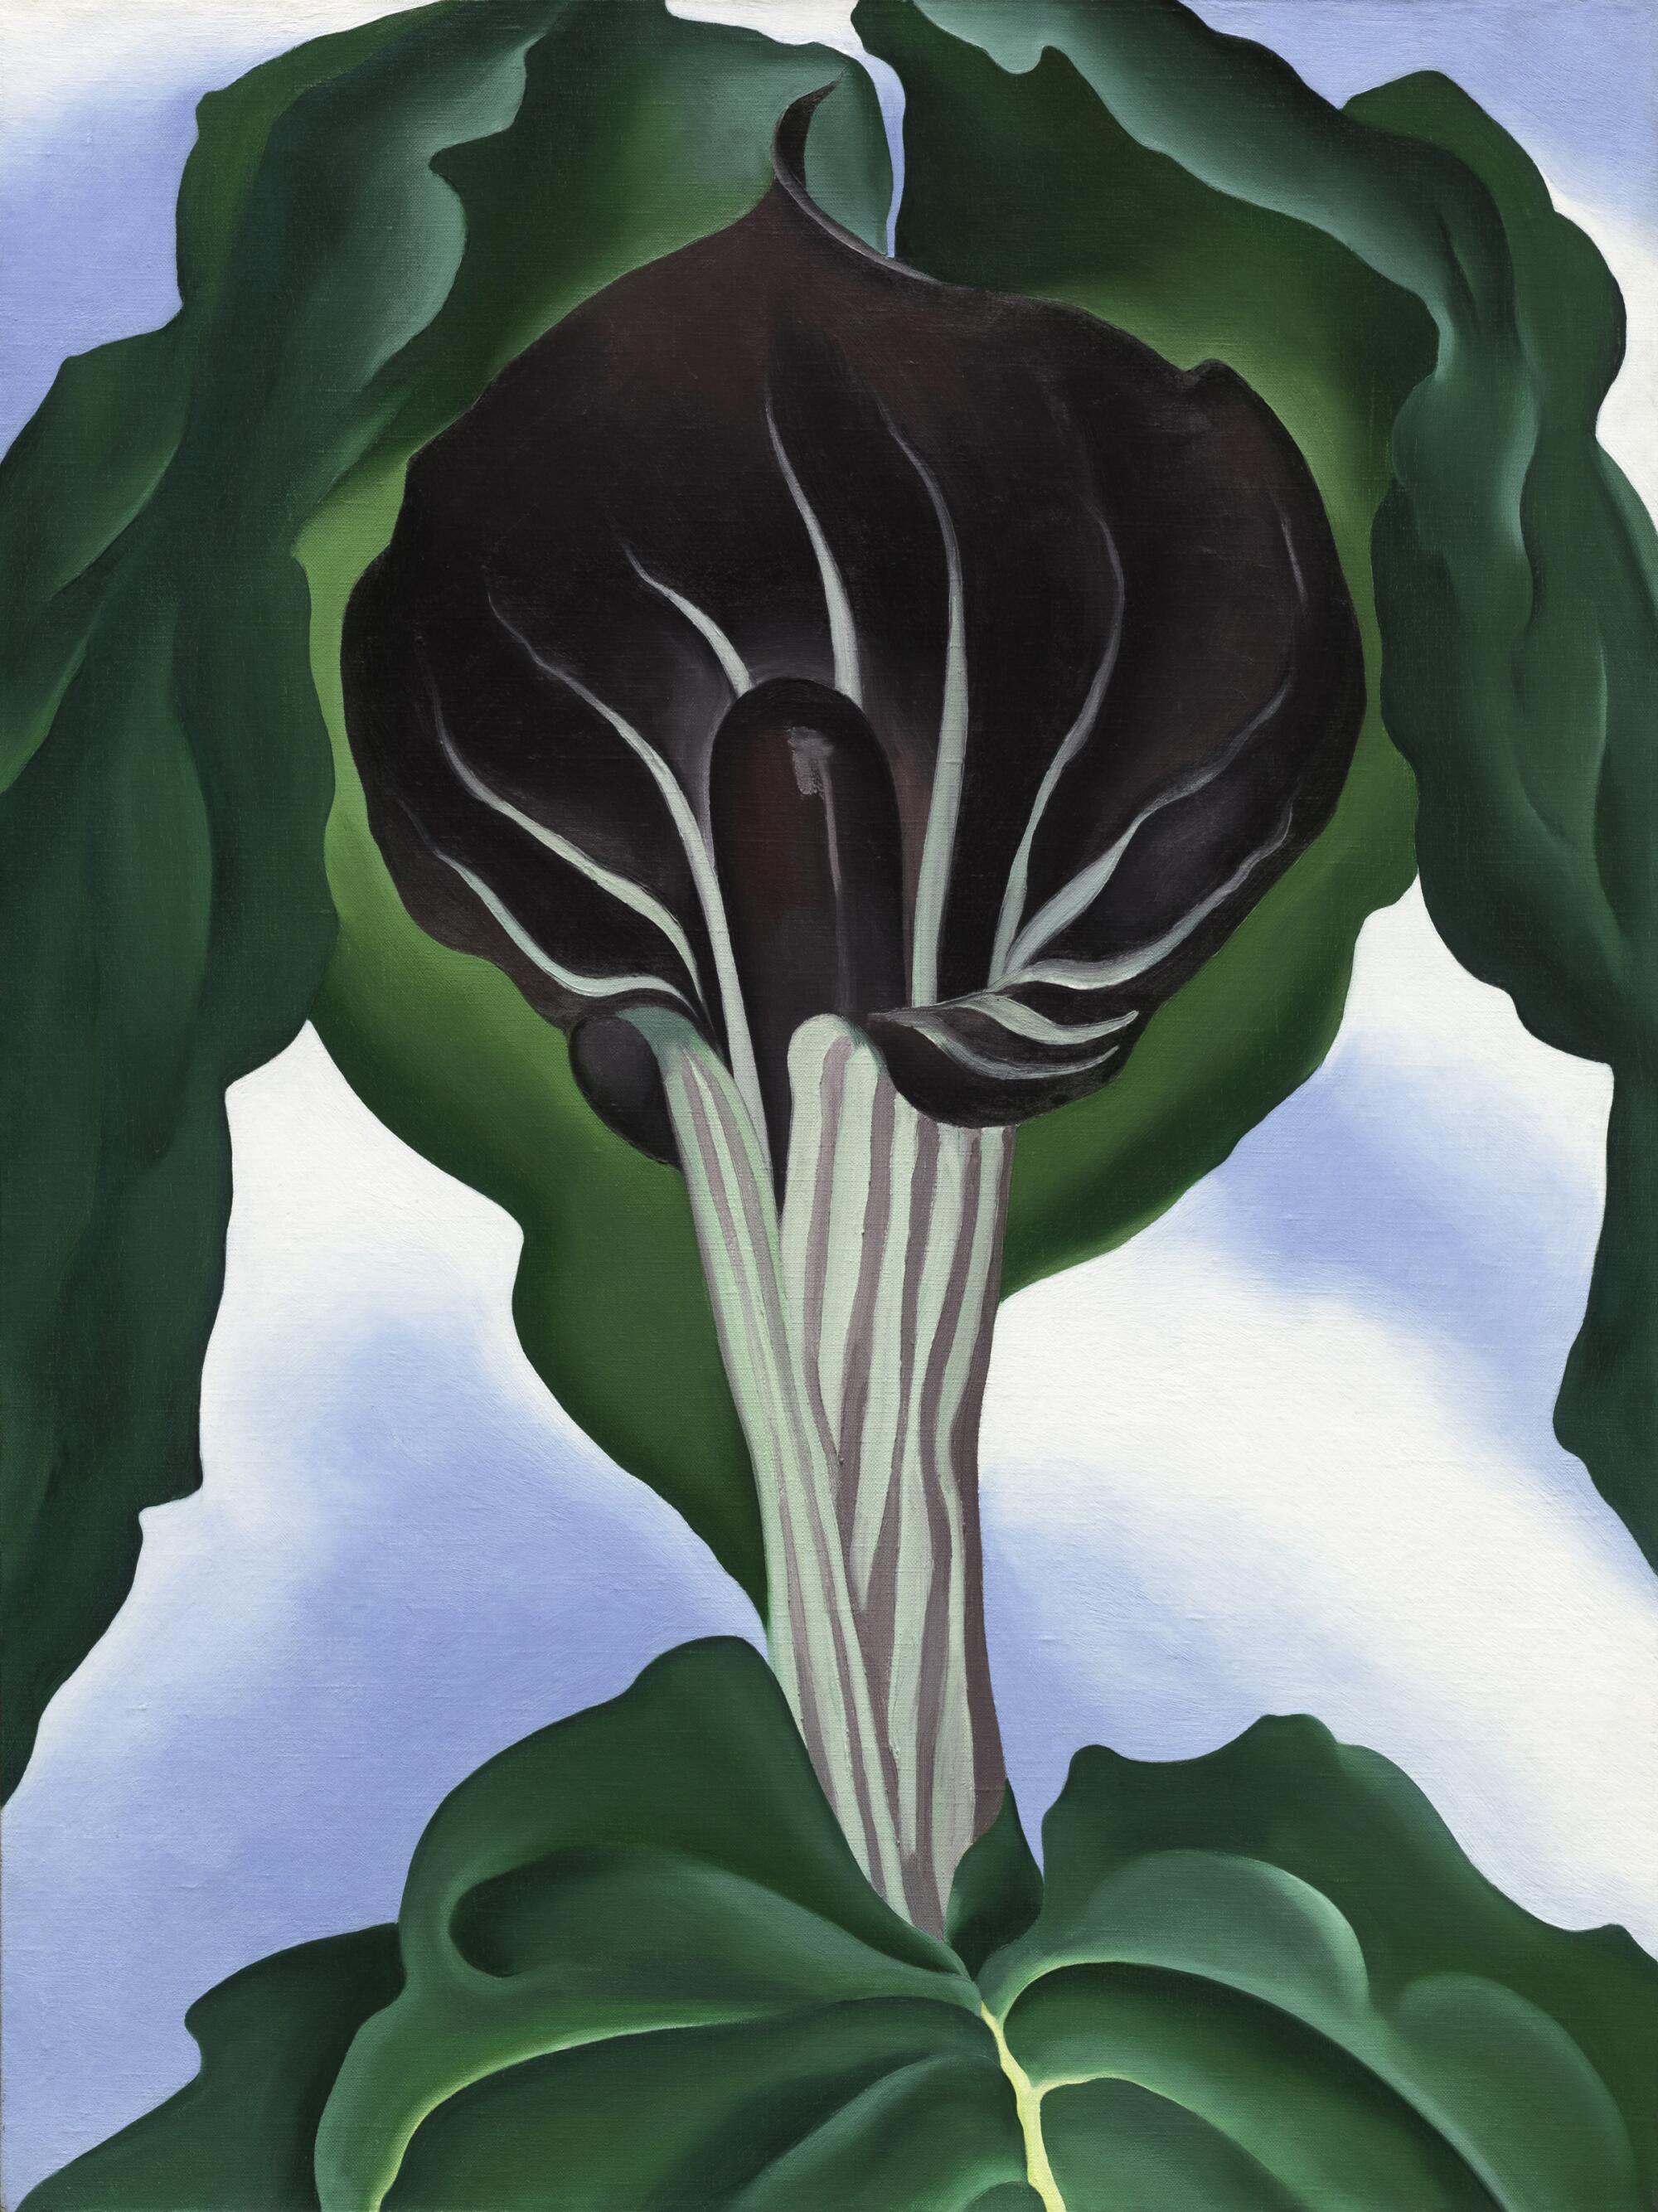 "Jack-in-the-Pulpit No. 3," a 1930 painting by Georgia O'Keeffe.